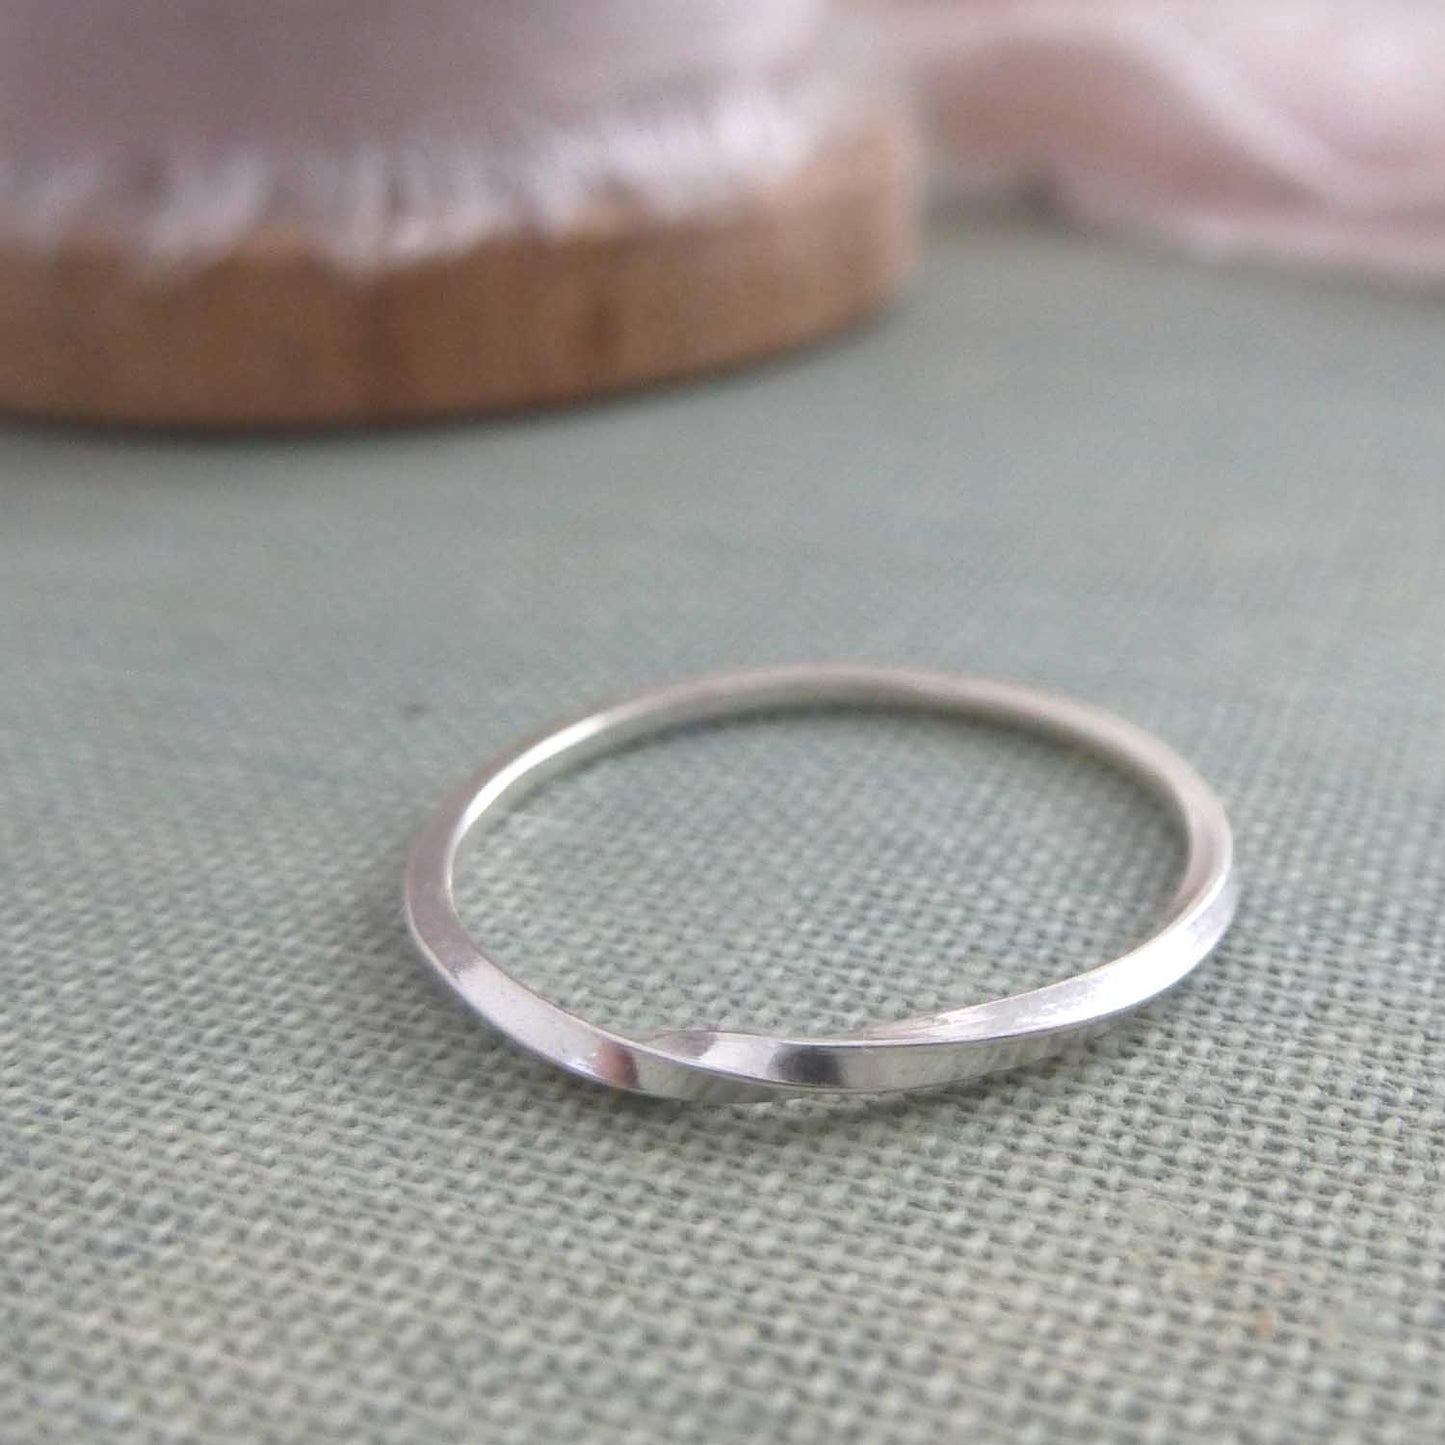 Skinny twist band ring - Sterling silver